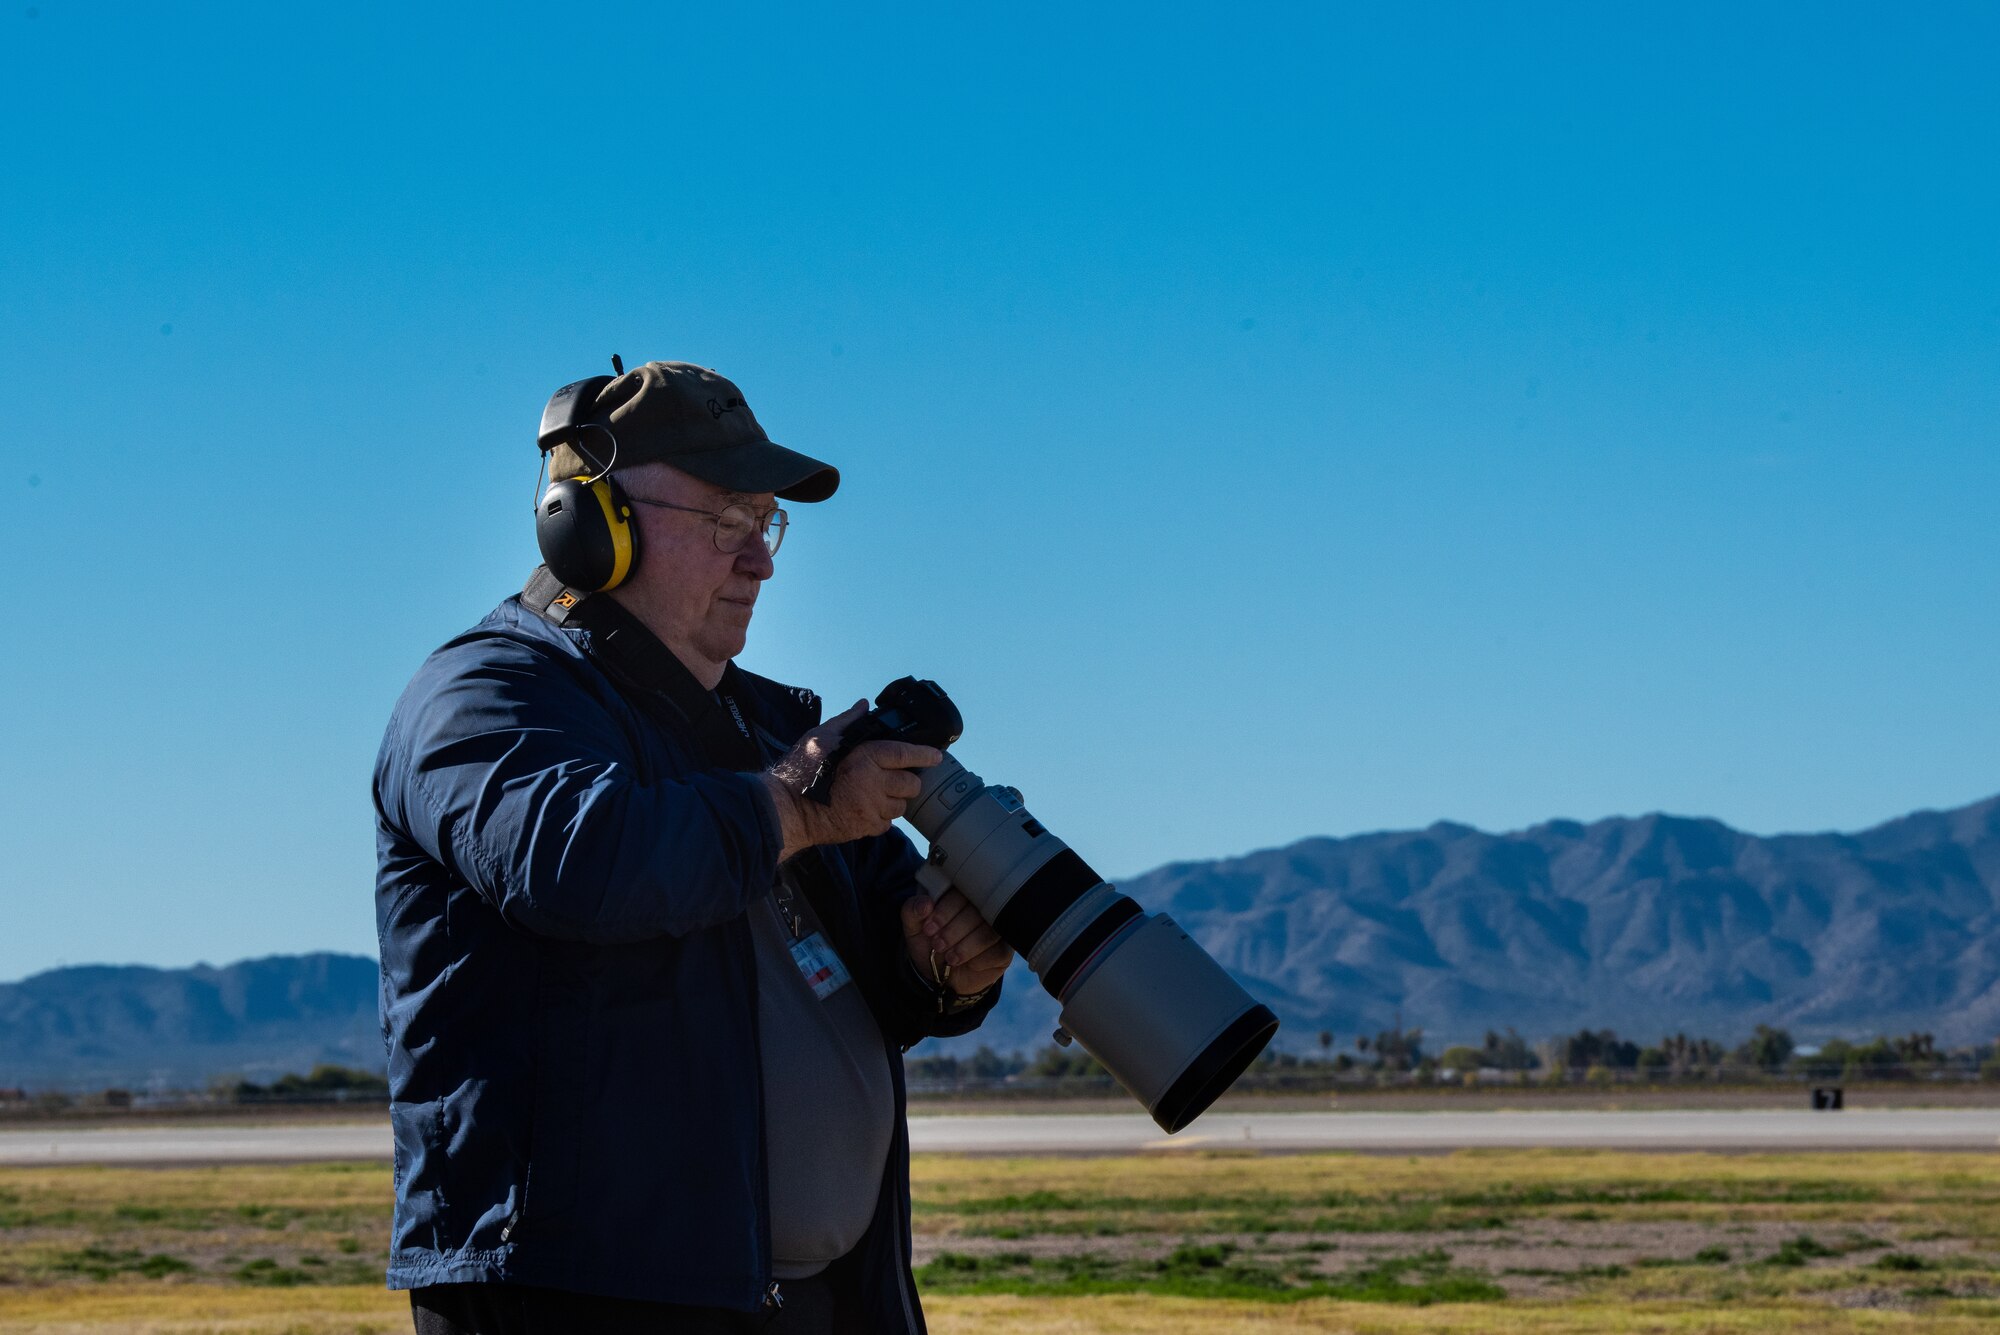 Harvey Brugger, 56th Operations Support Squadron air traffic controller, looks over his flight line imagery, Dec. 13, 2018, at Luke Air Force Base, Ariz.